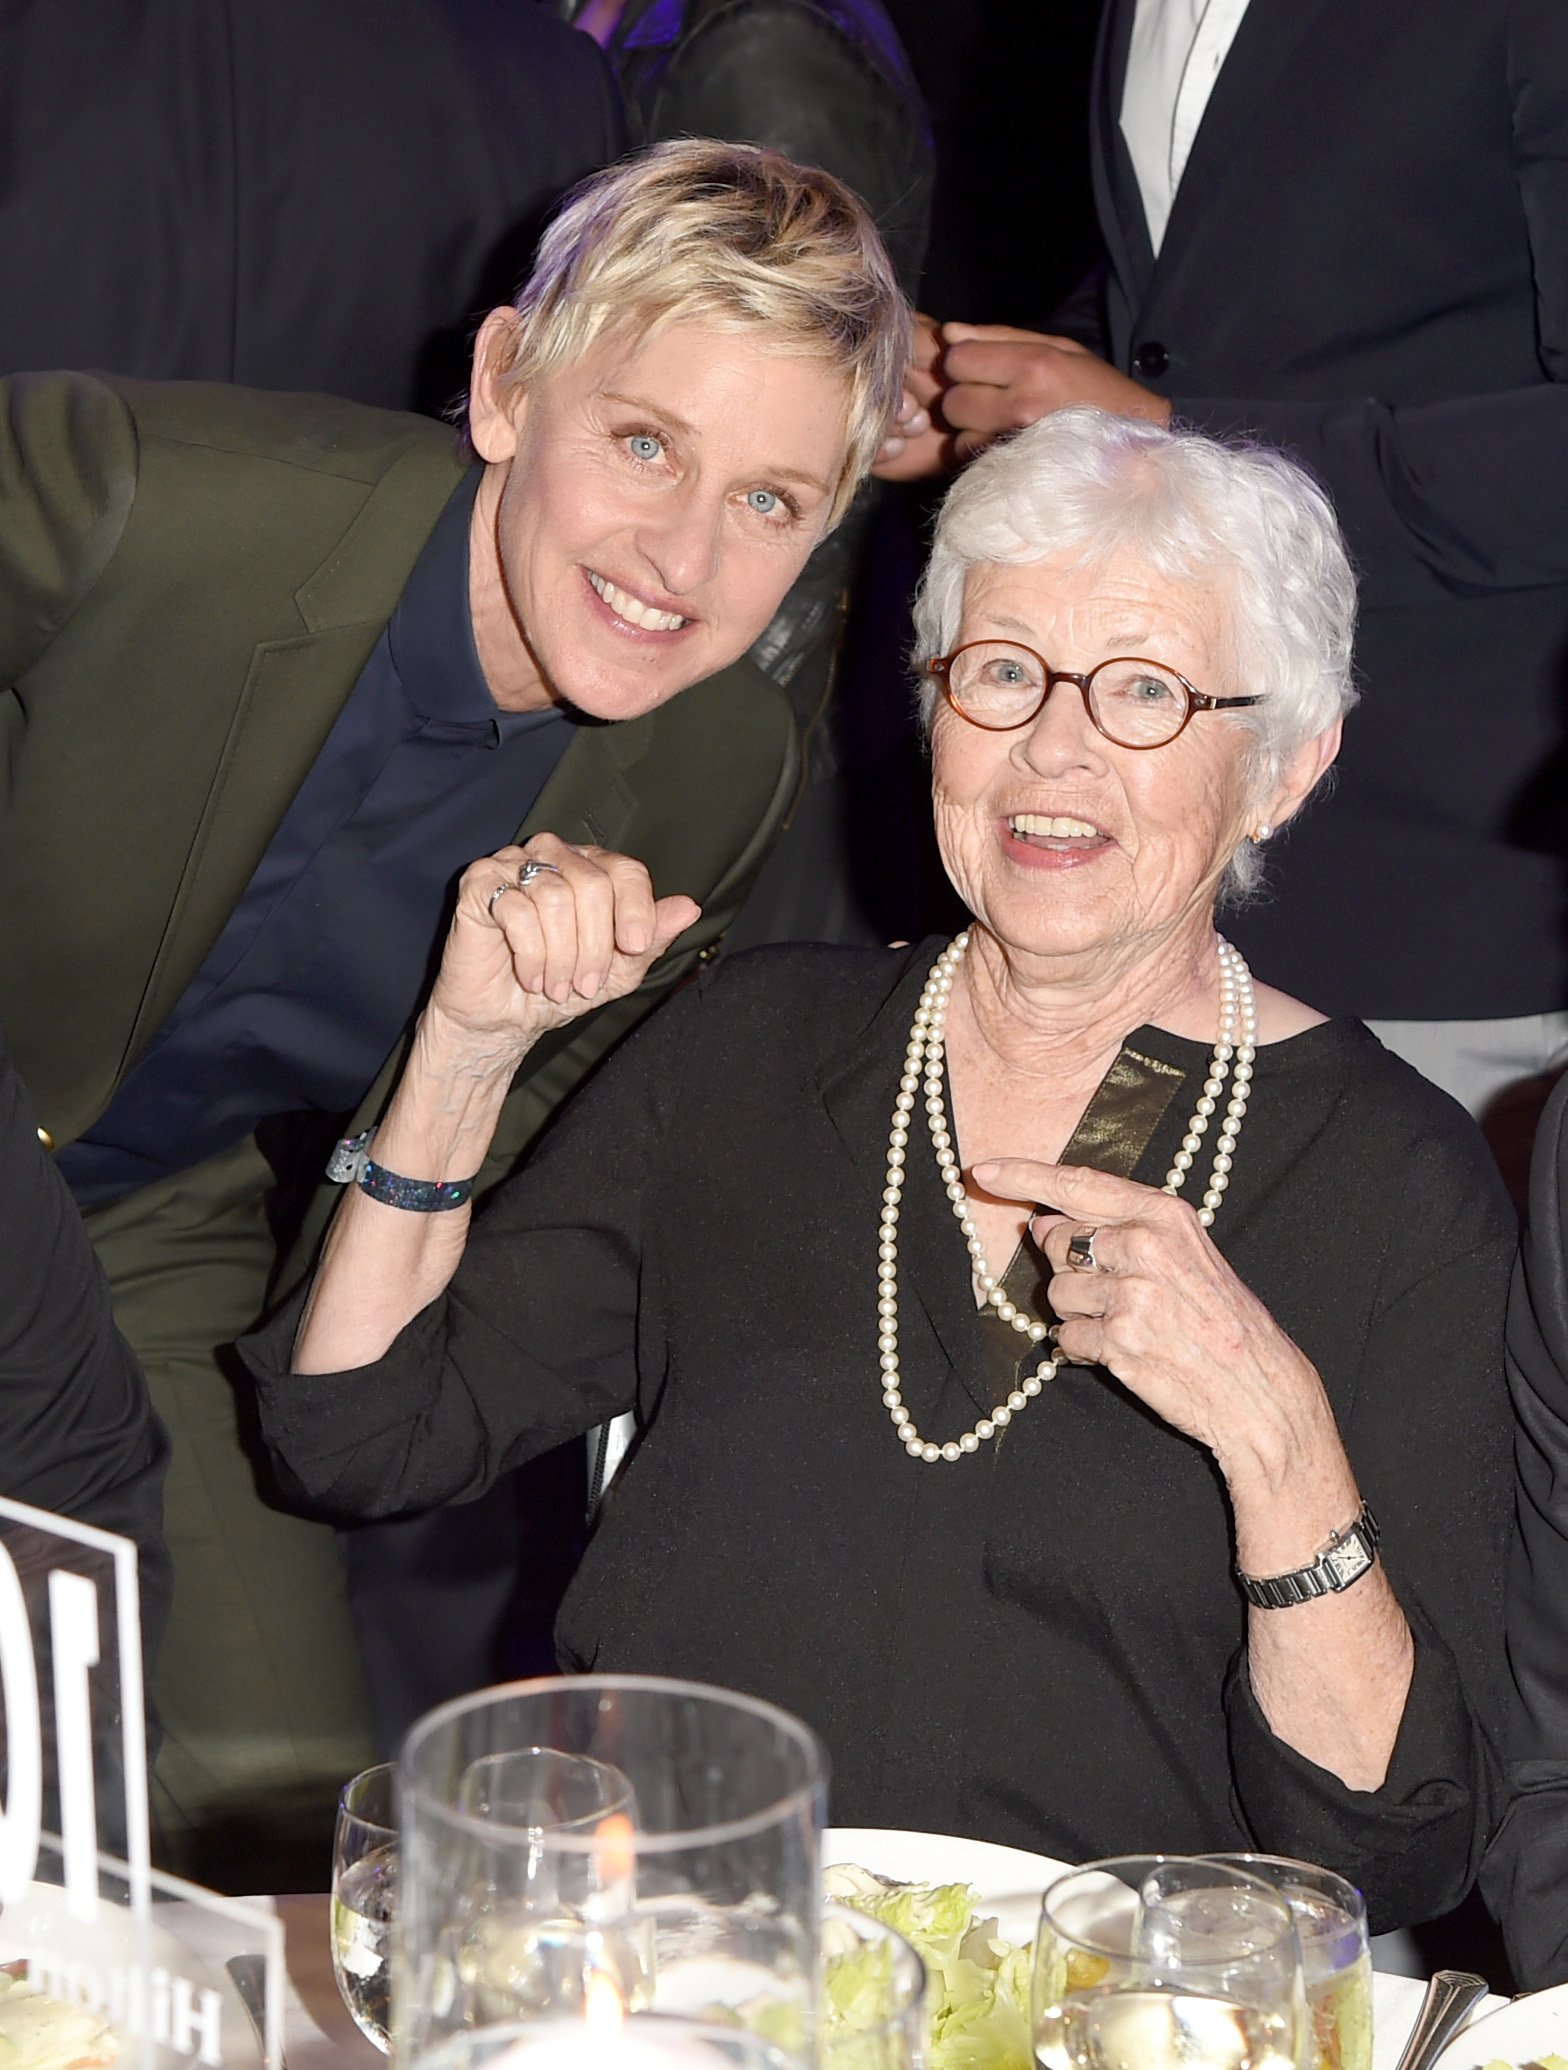 Ellen DeGeneres and her mother, Betty DeGeneres attend the 26th Annual GLAAD Media Awards at The Beverly Hilton Hotel on March 21, 2015 | Photo: GettyImages